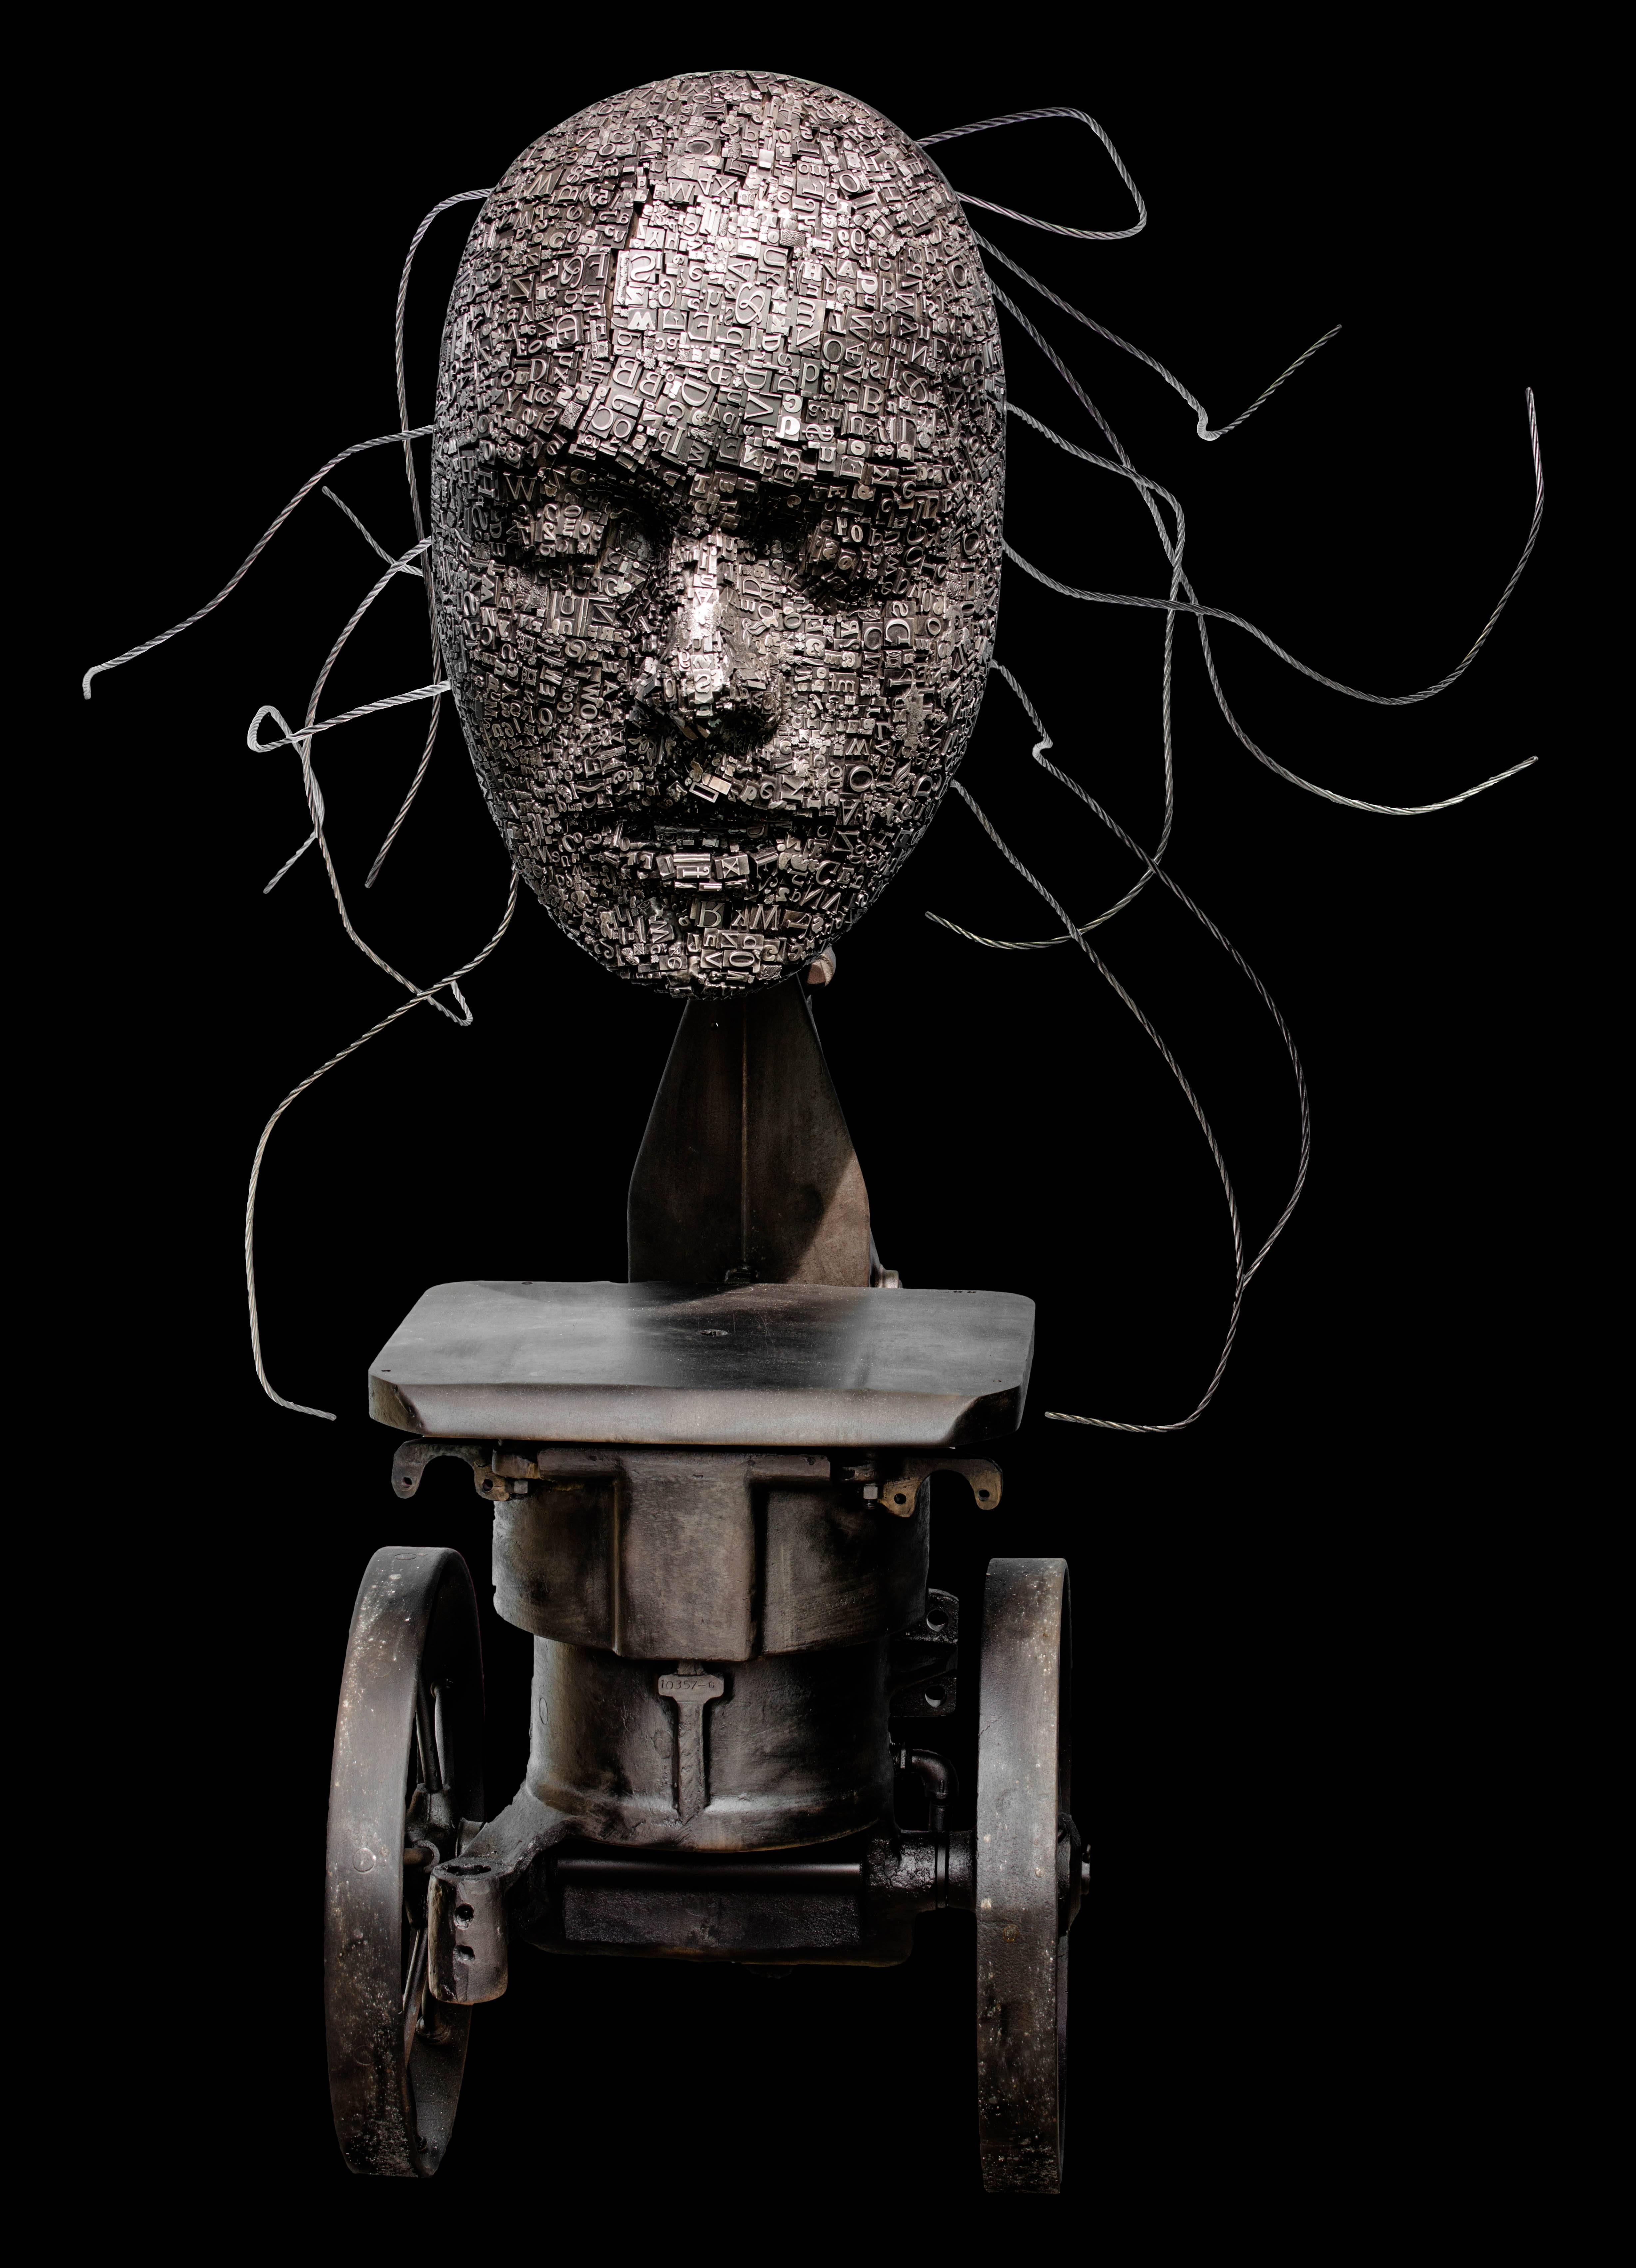 Press - tall, steam-punk inspired, human face, lead, aluminum and iron sculpture